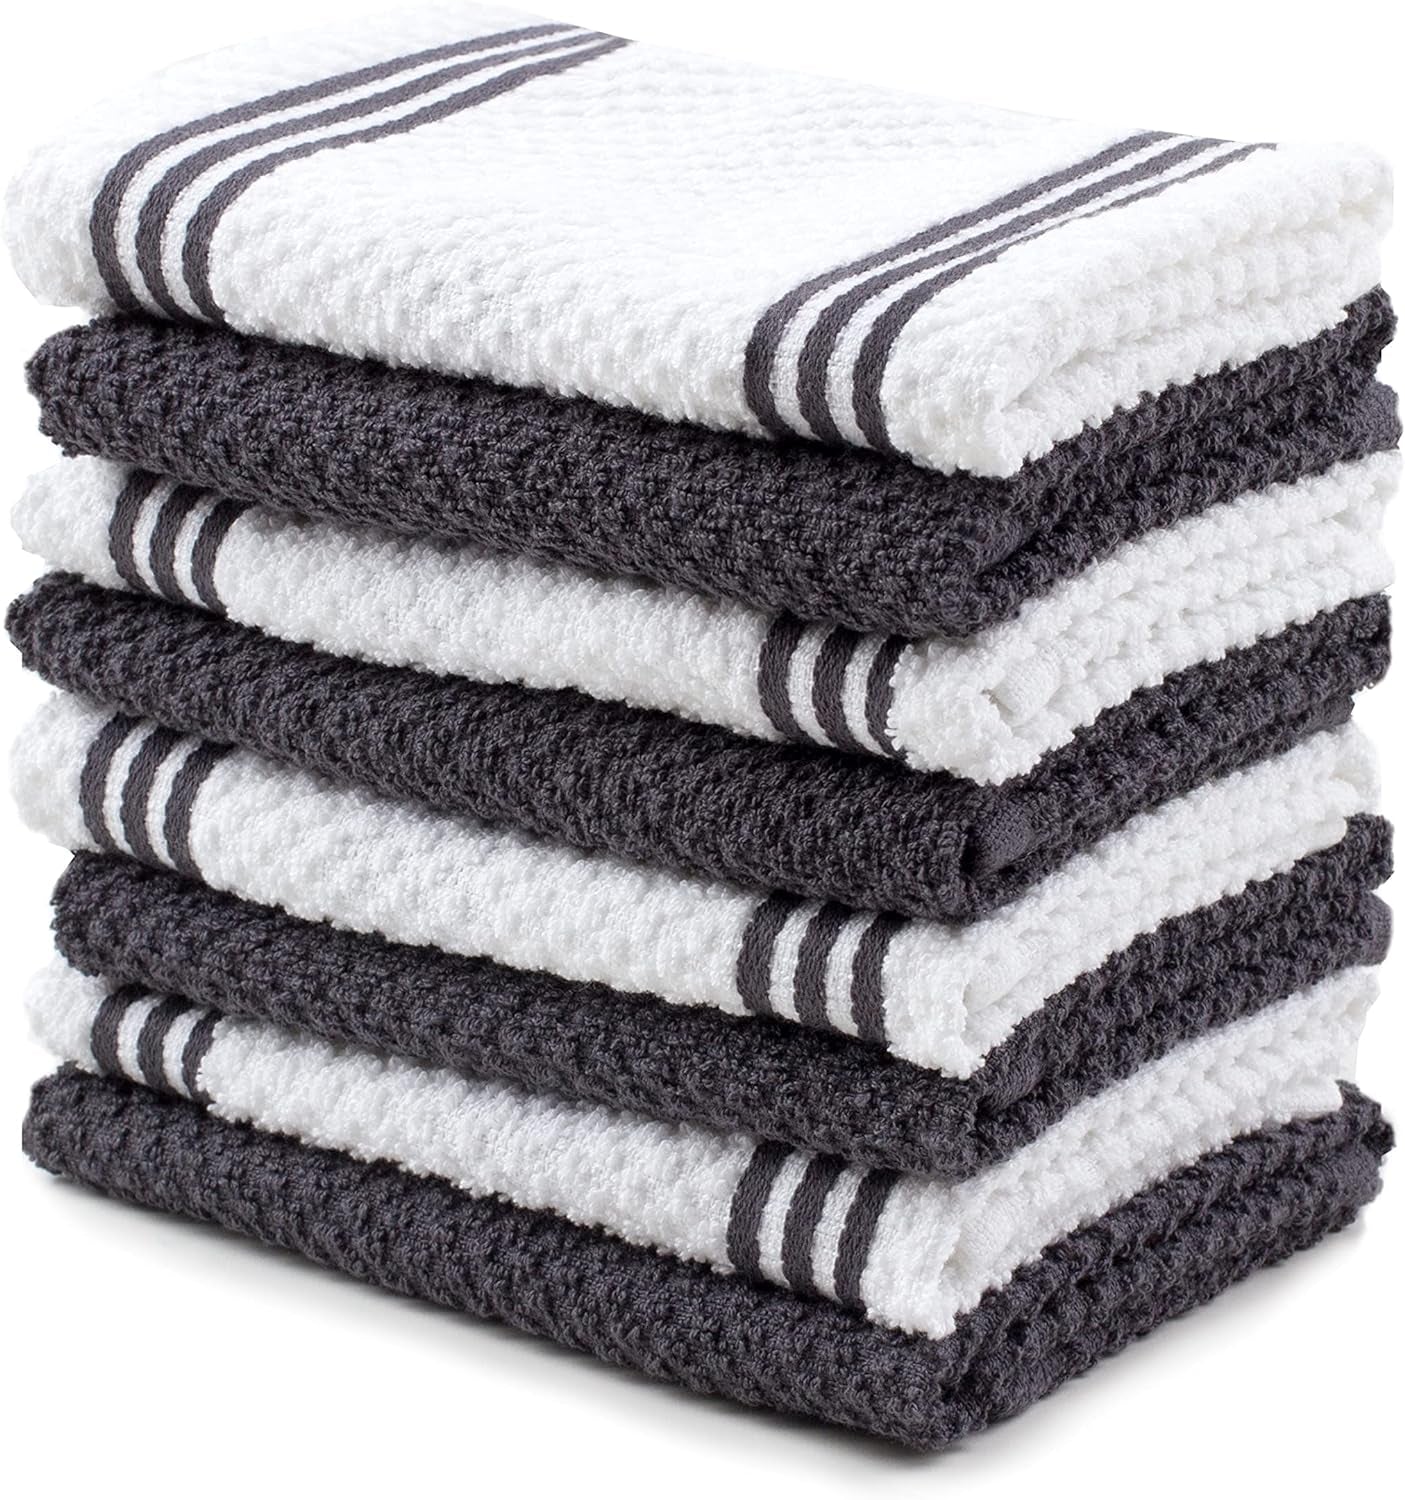 Cotton Kitchen Towels Dishcloths Set of 8, Gray and White Tea Towels, Reusable and Absorbent Cleaning Cloths, Oeko-Tex Cotton, 12 in X 12 In